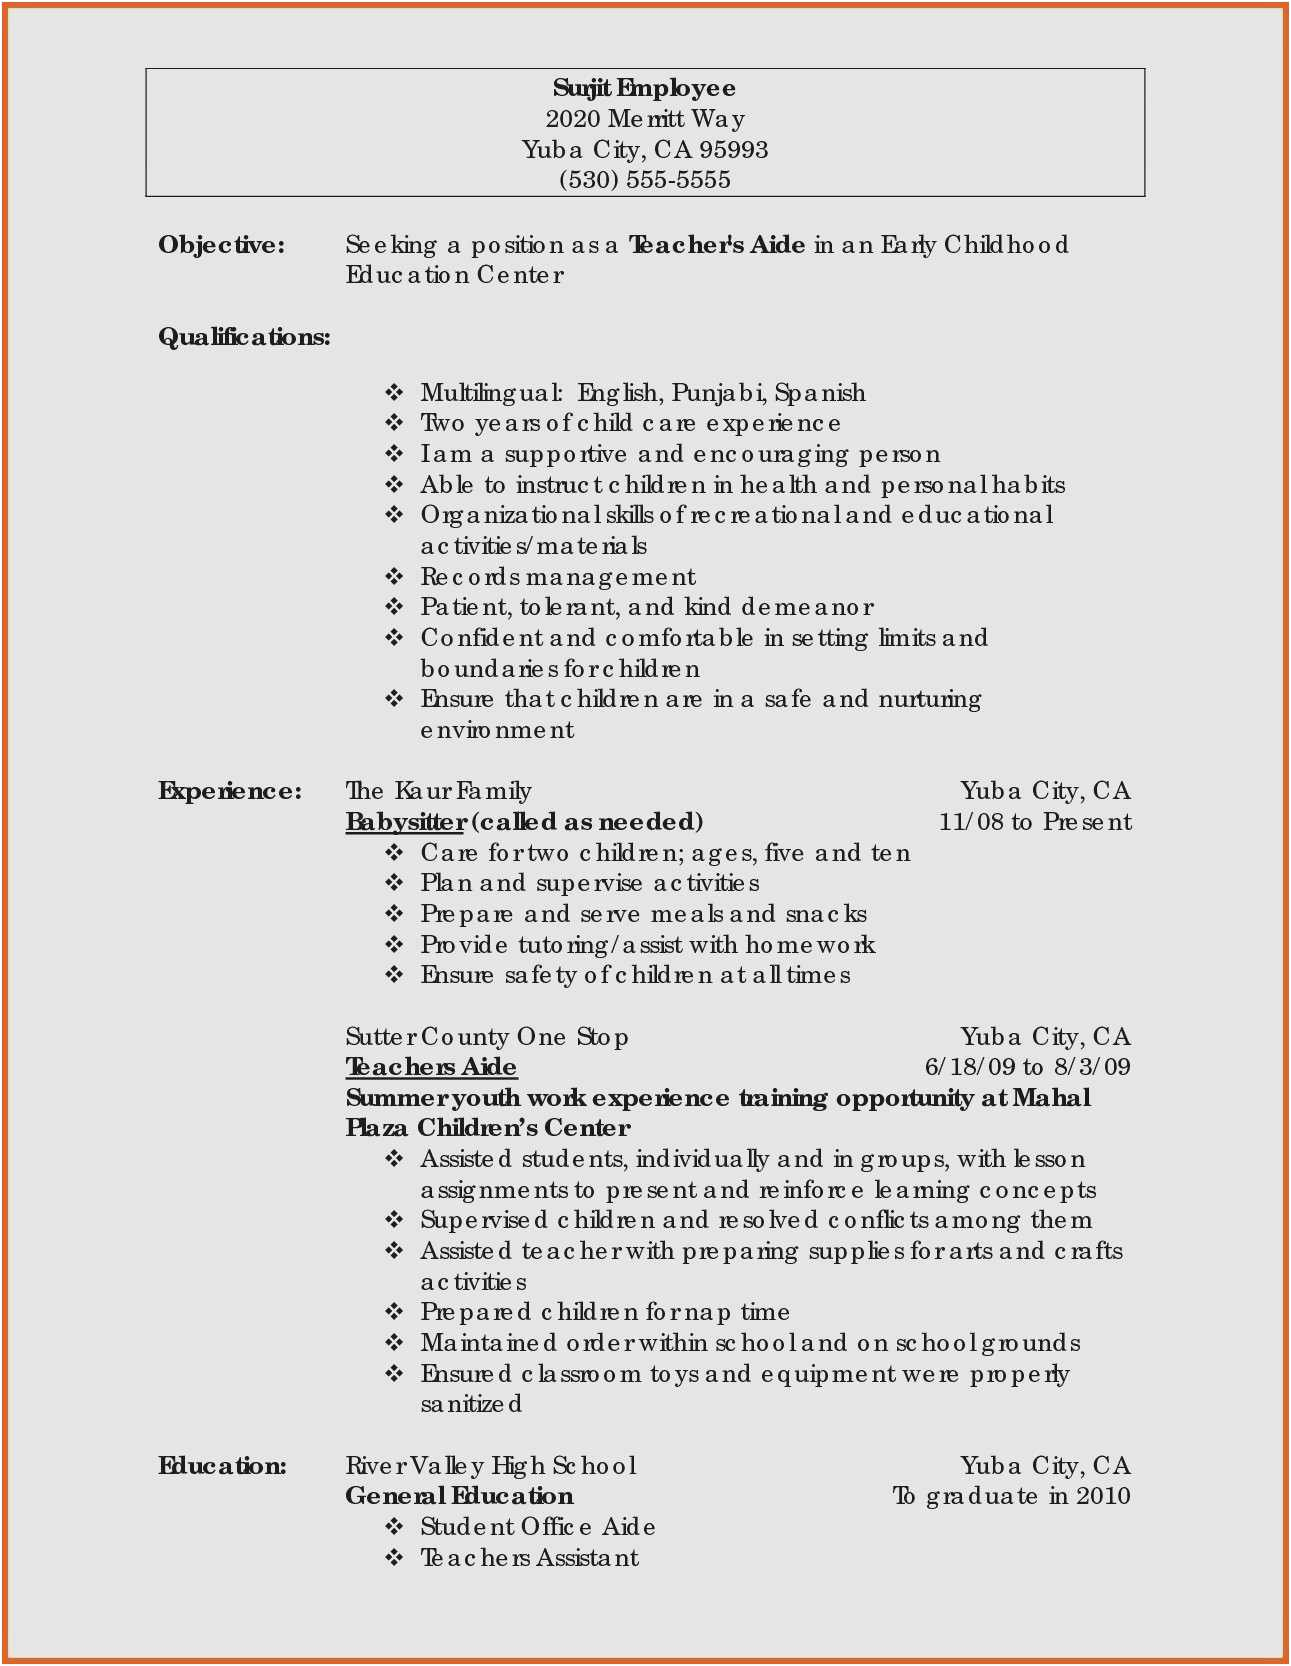 early childhood education resume